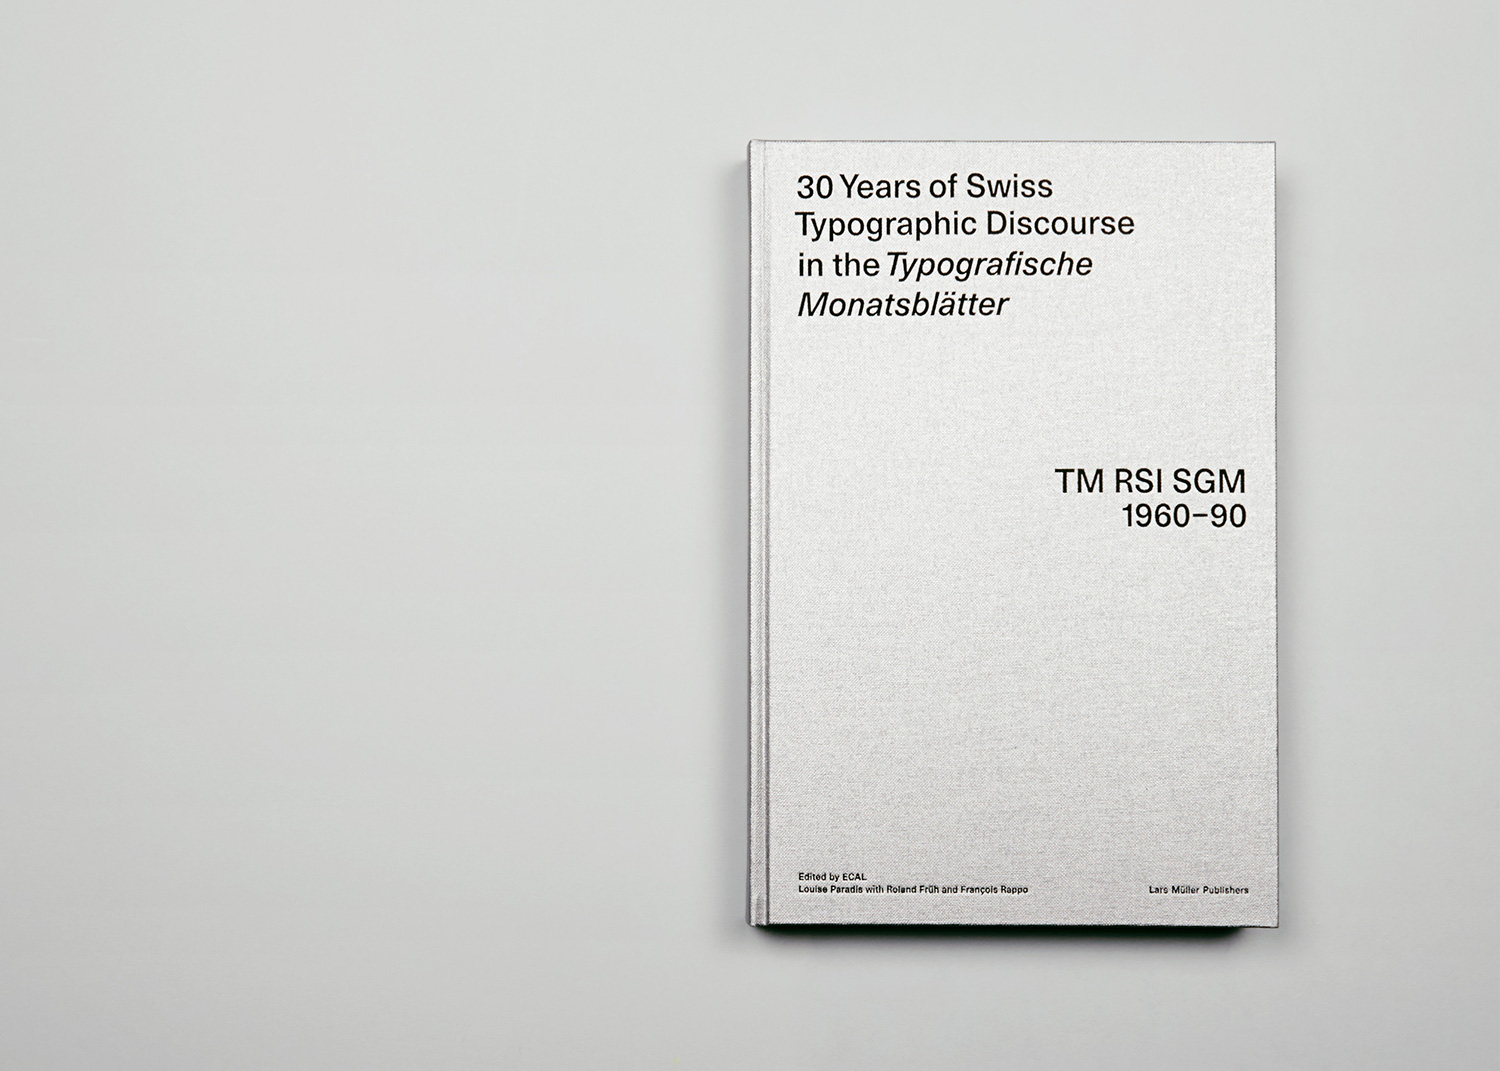 MAAD | 30 Years of Swiss Typographic Discourse in the 